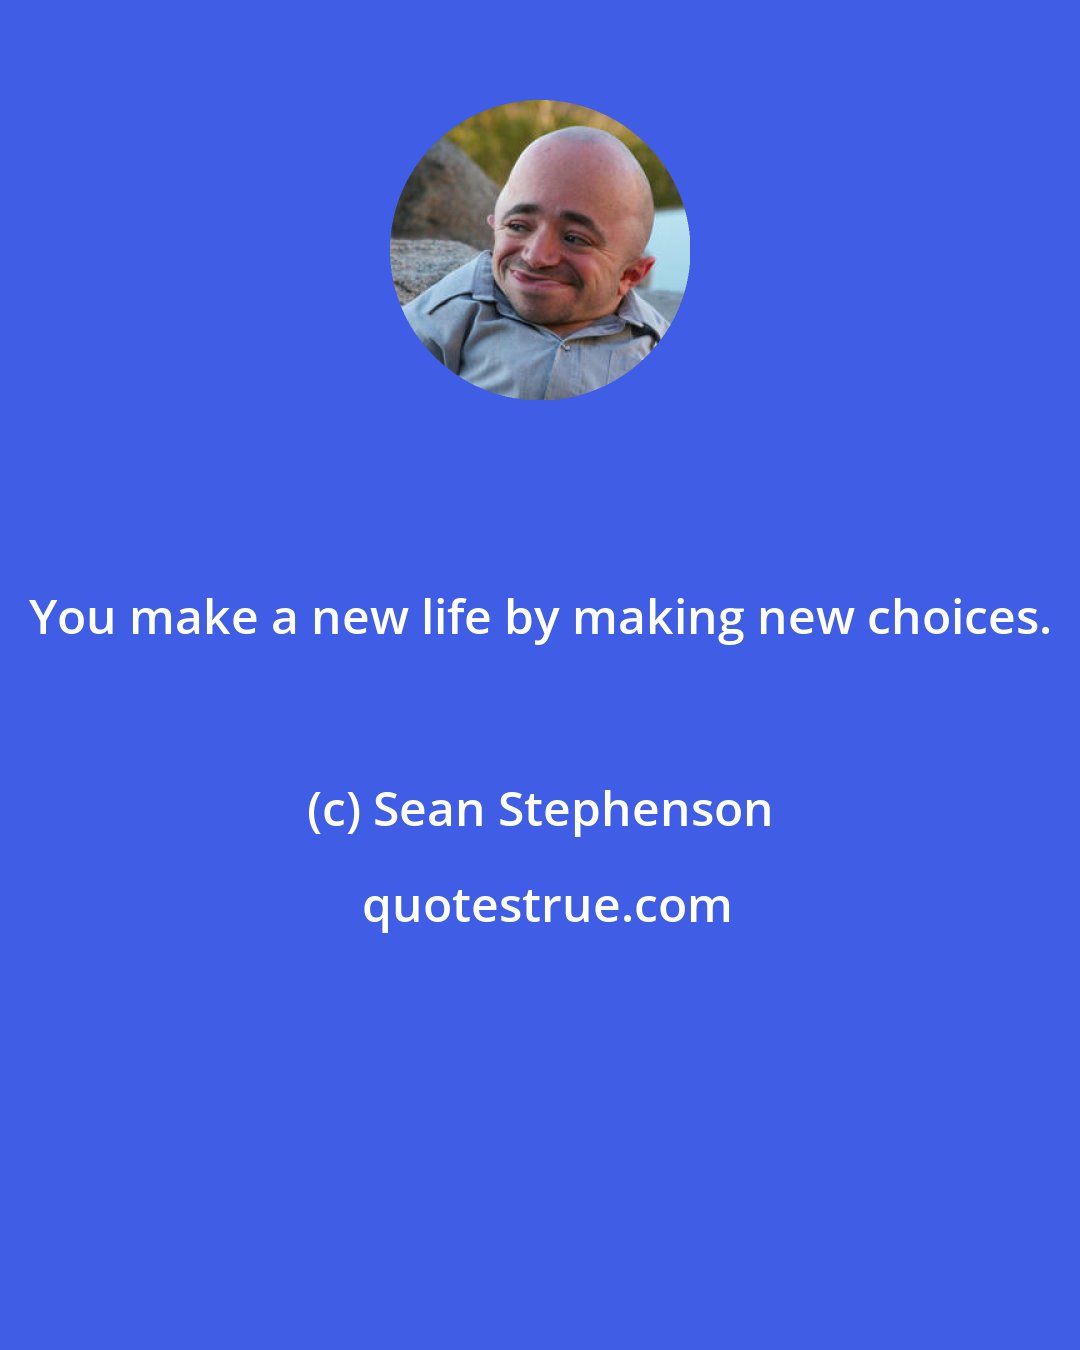 Sean Stephenson: You make a new life by making new choices.